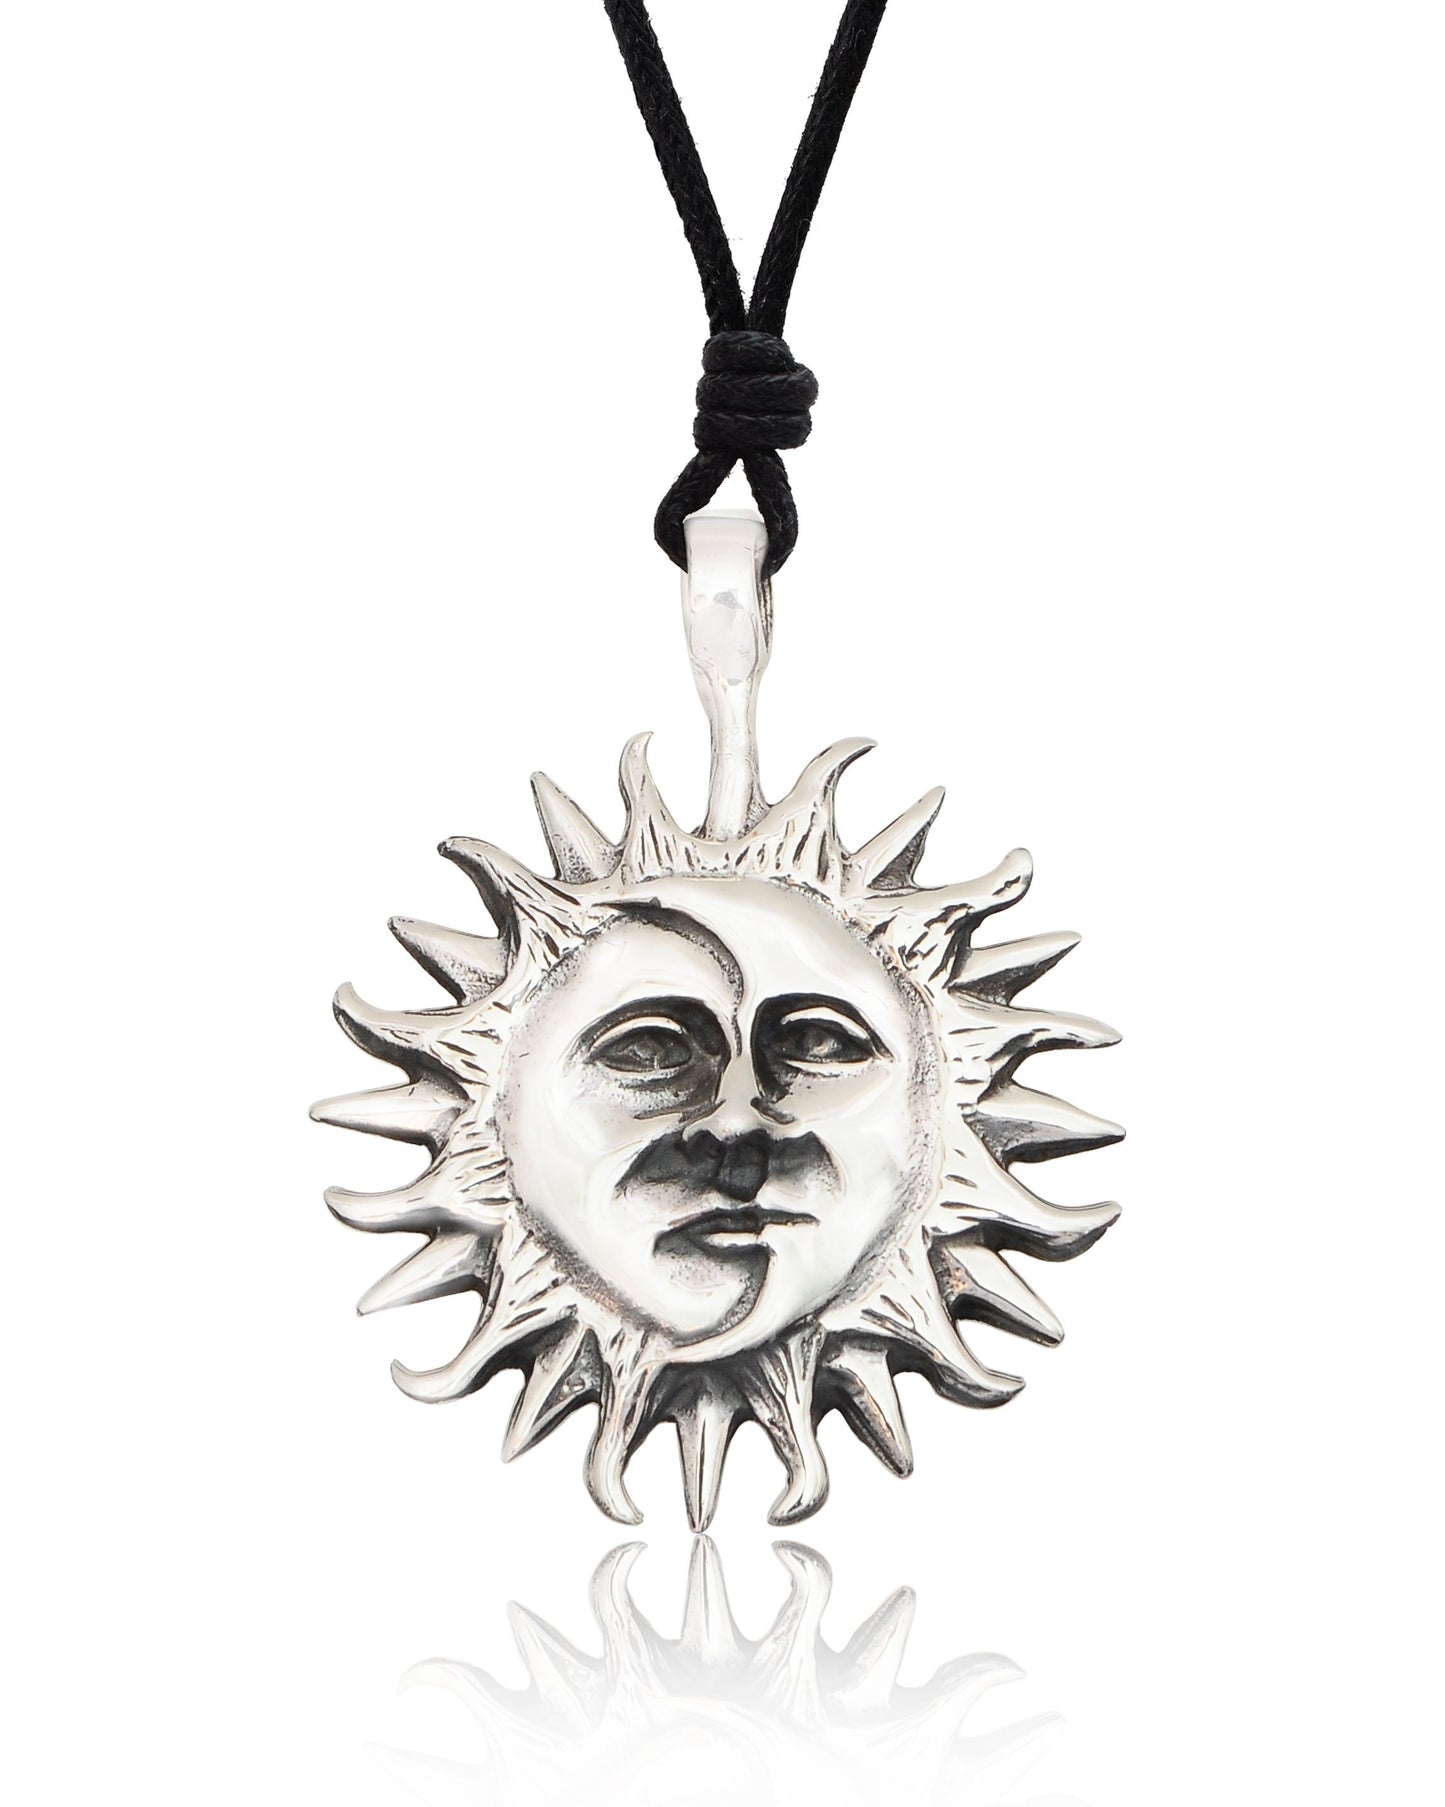 New Ying Yang Sun And Moon  92.5 Sterling Silver Charm Necklace Pendant Jewelry